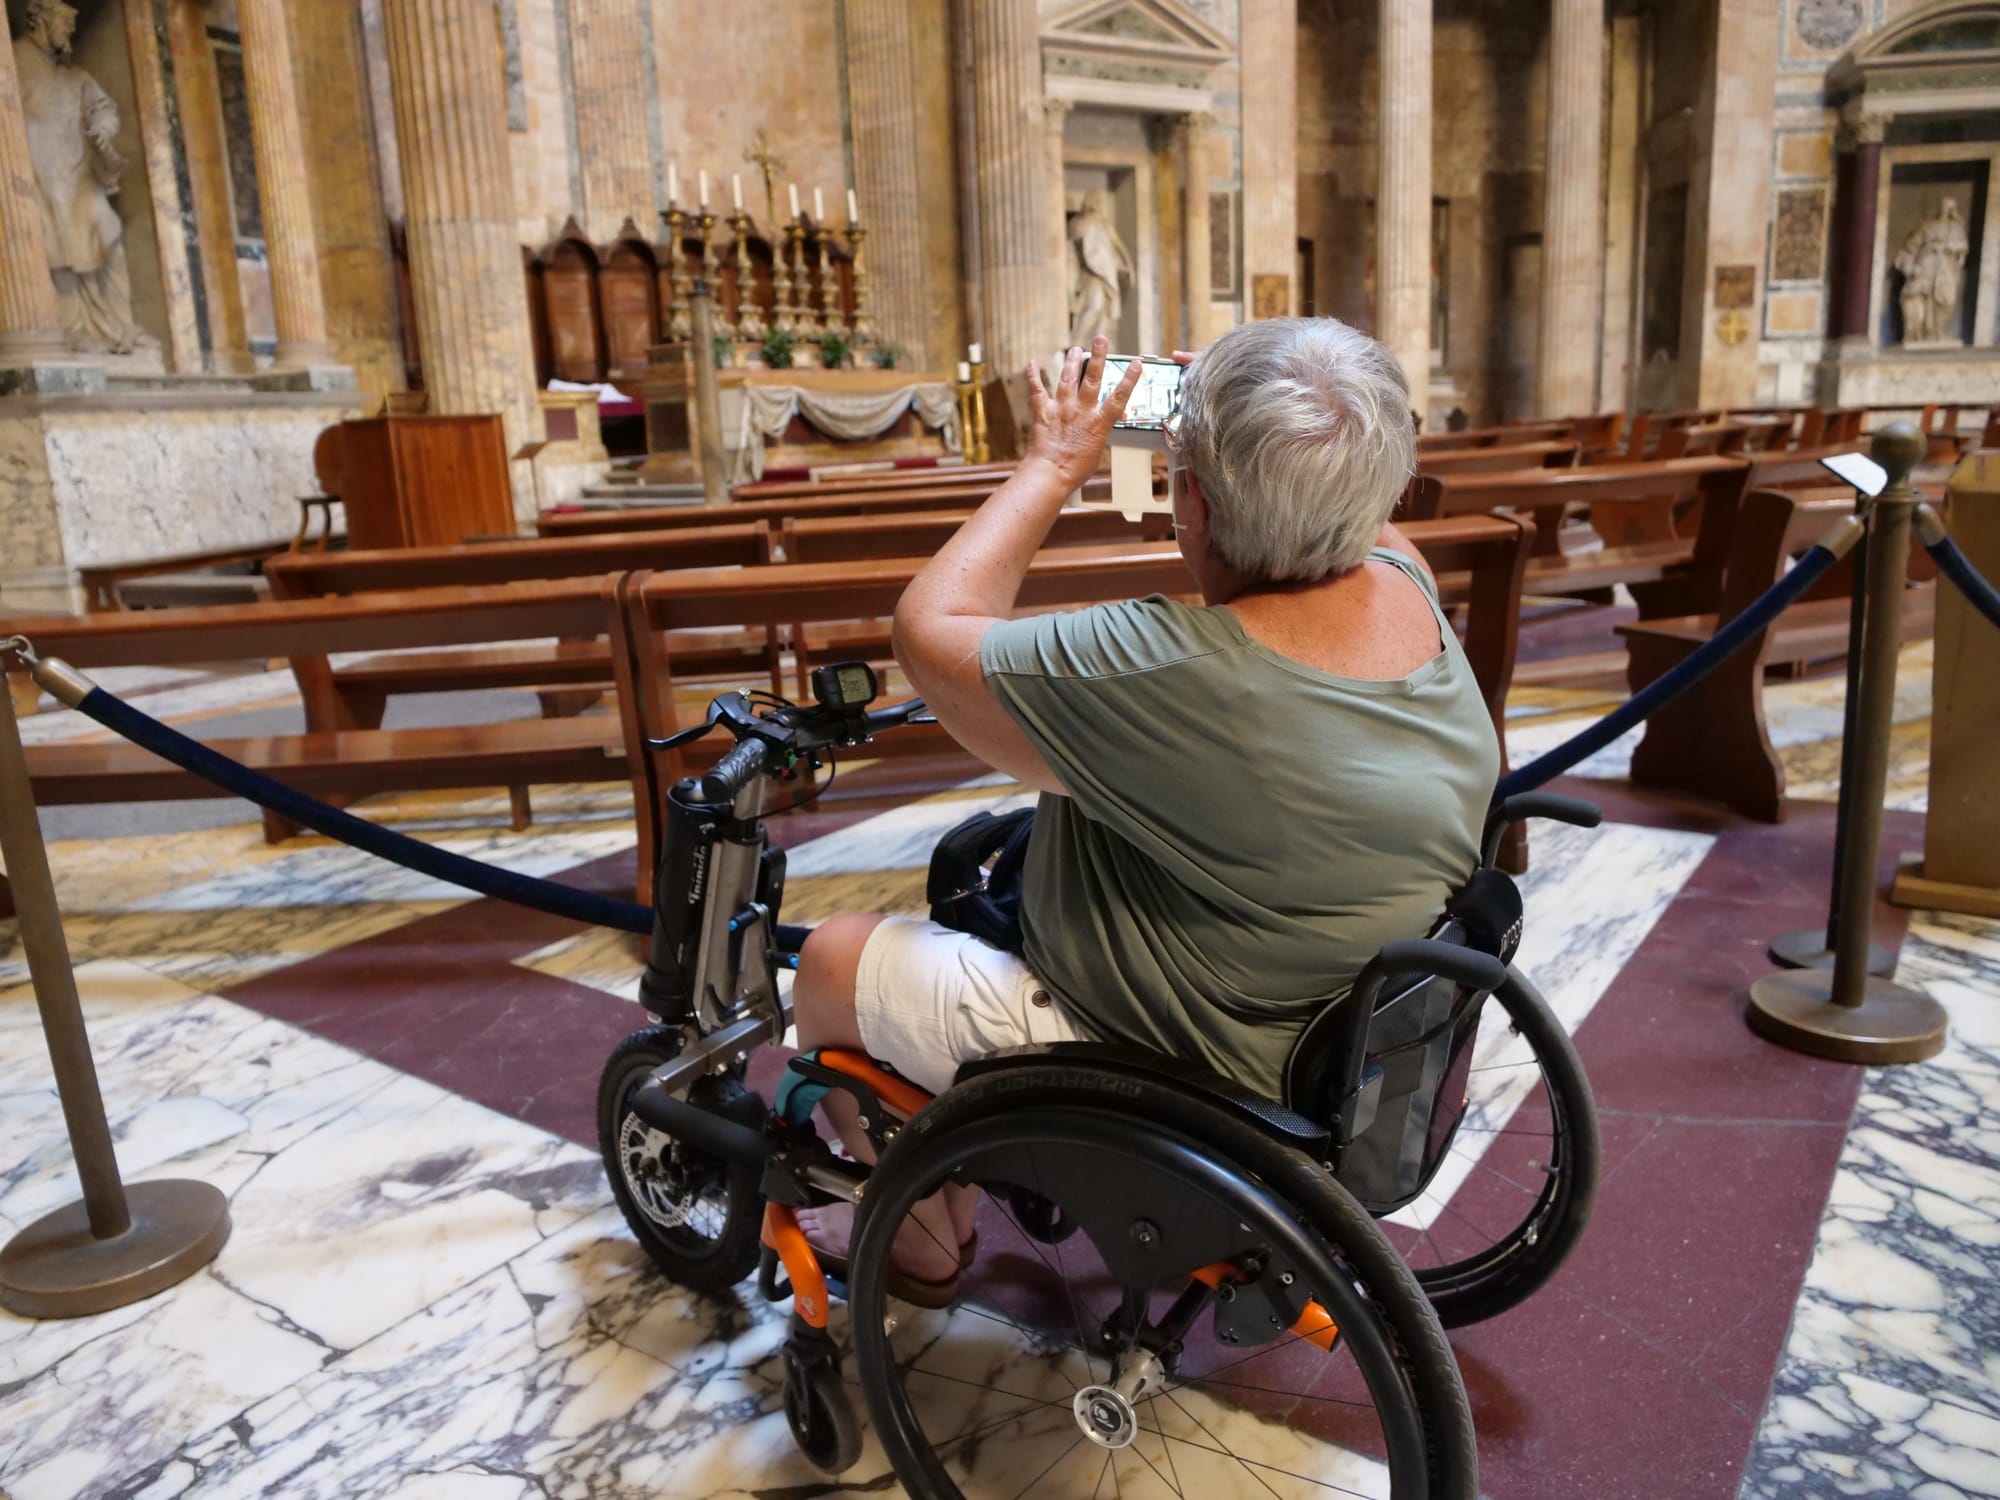 Capturing photos on a Rome tour for limited mobility